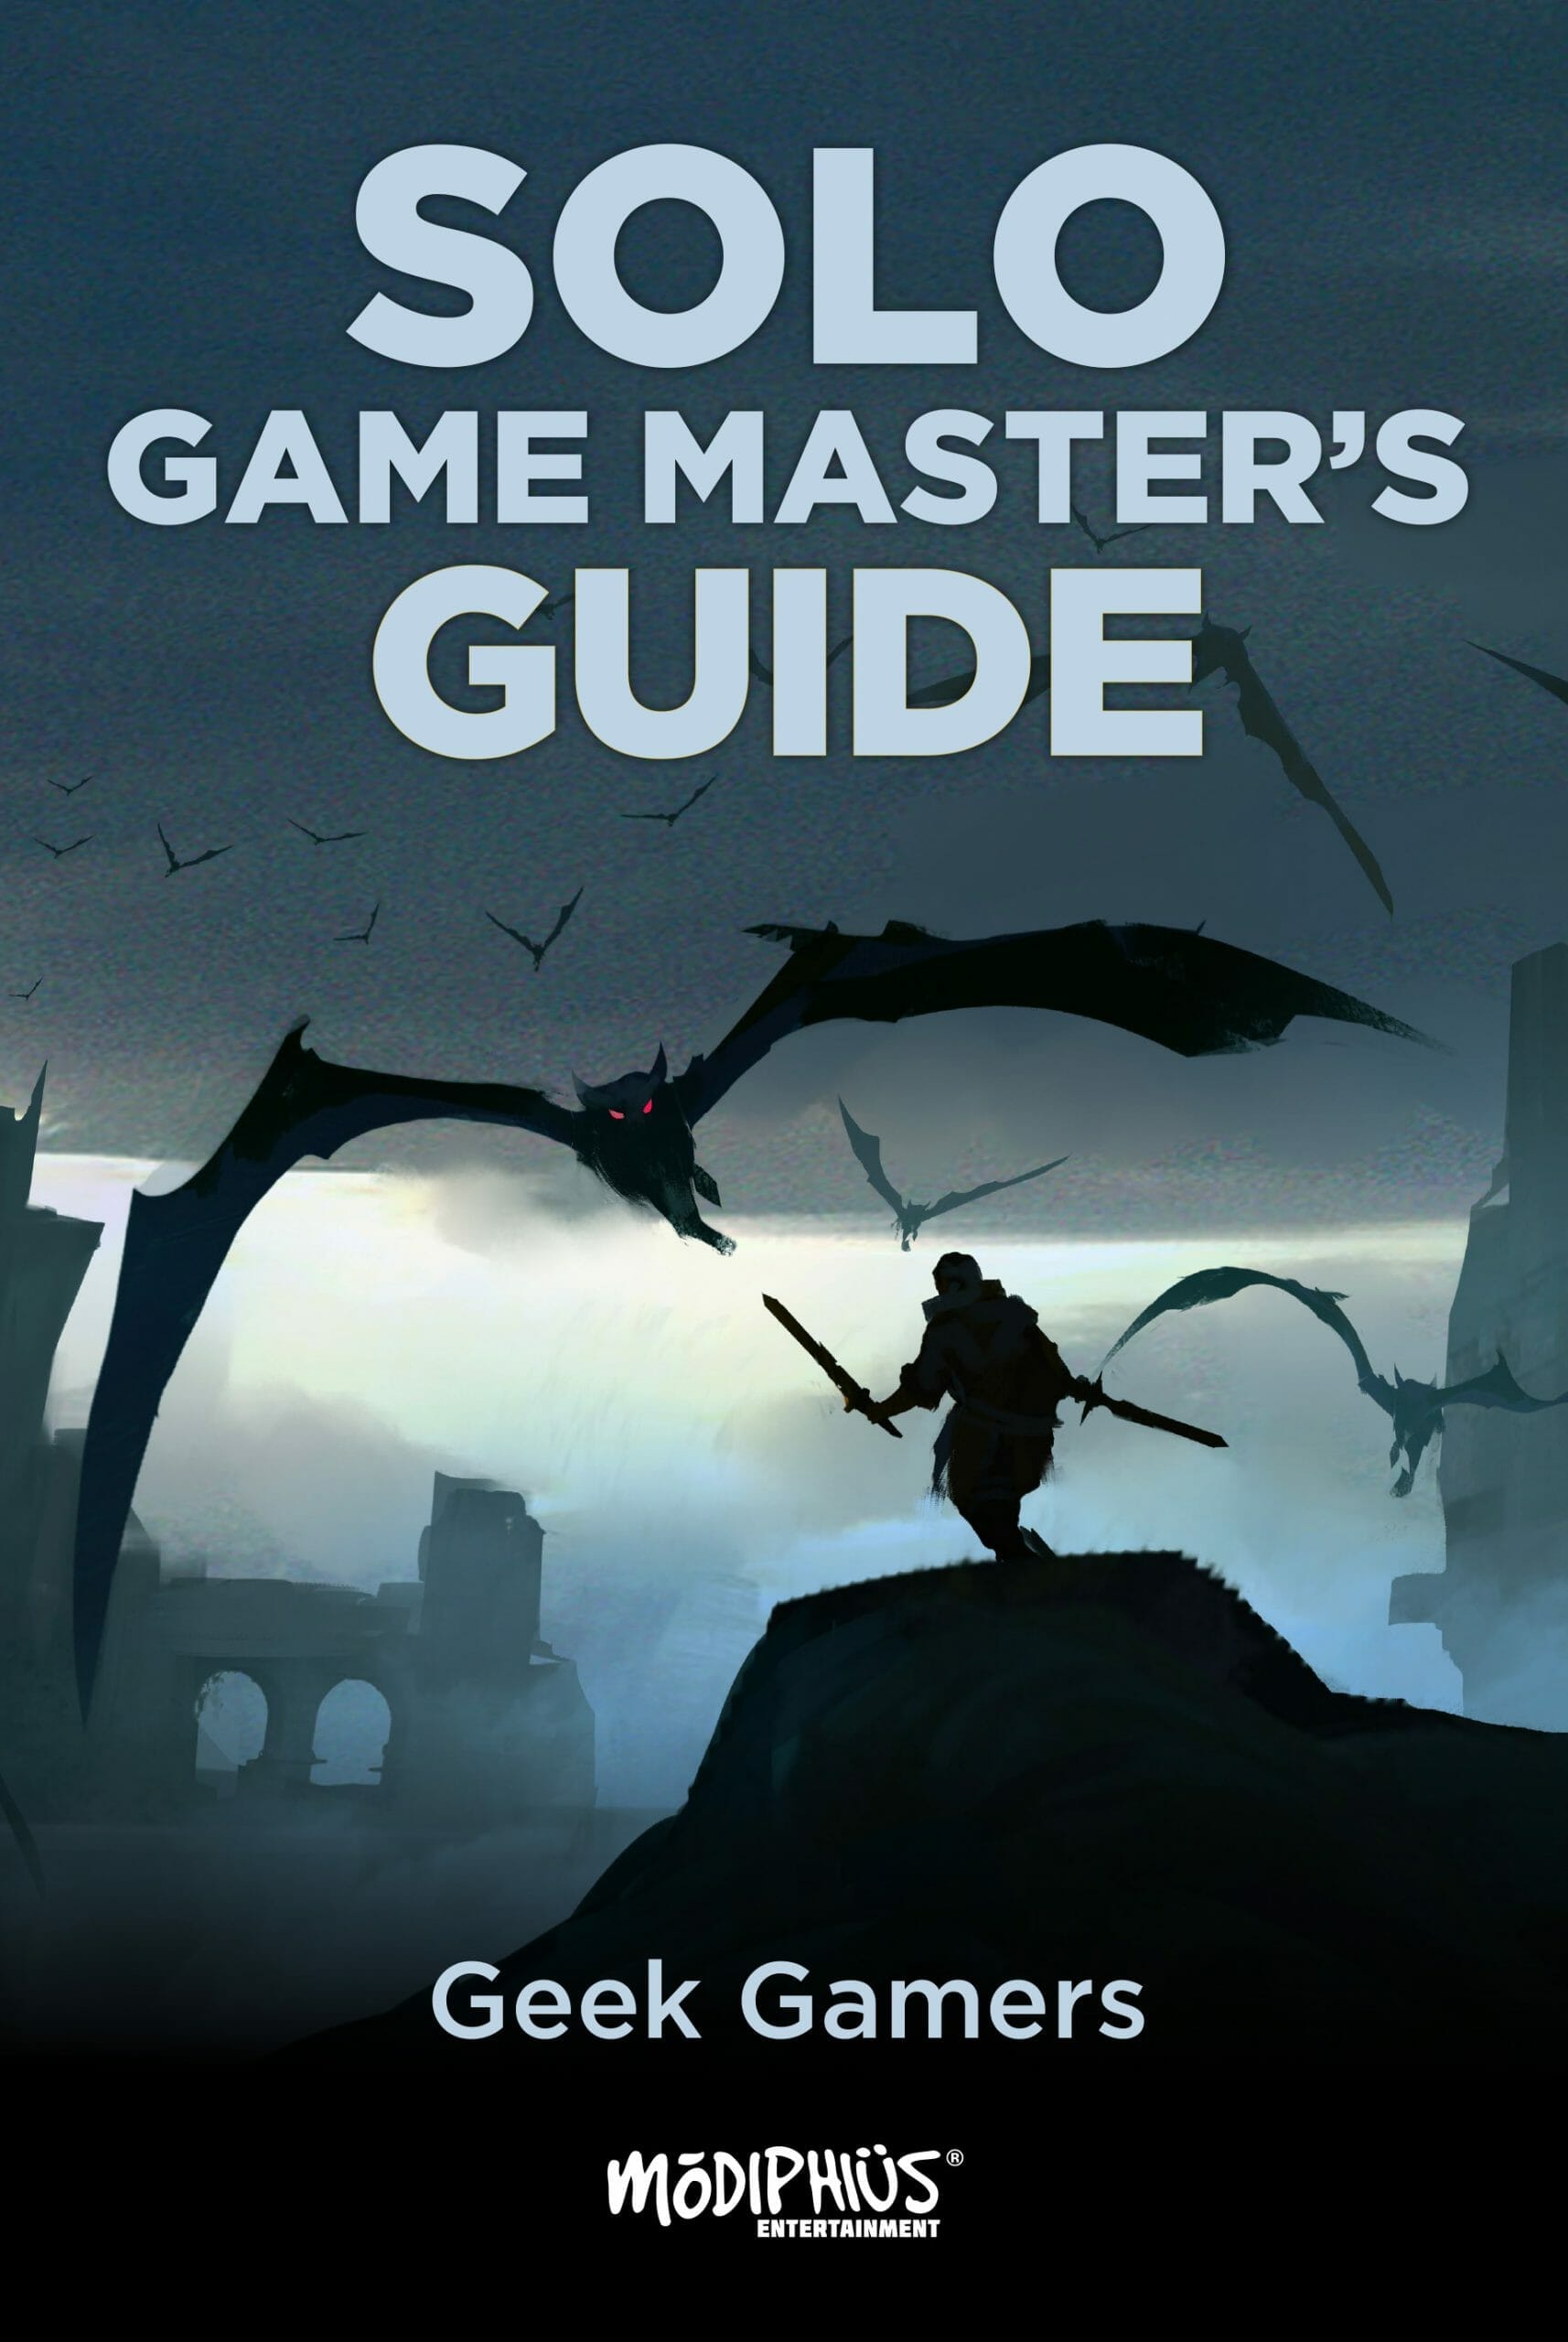 Pre-orders open on Geek Gamers' Solo Game Master's Guide